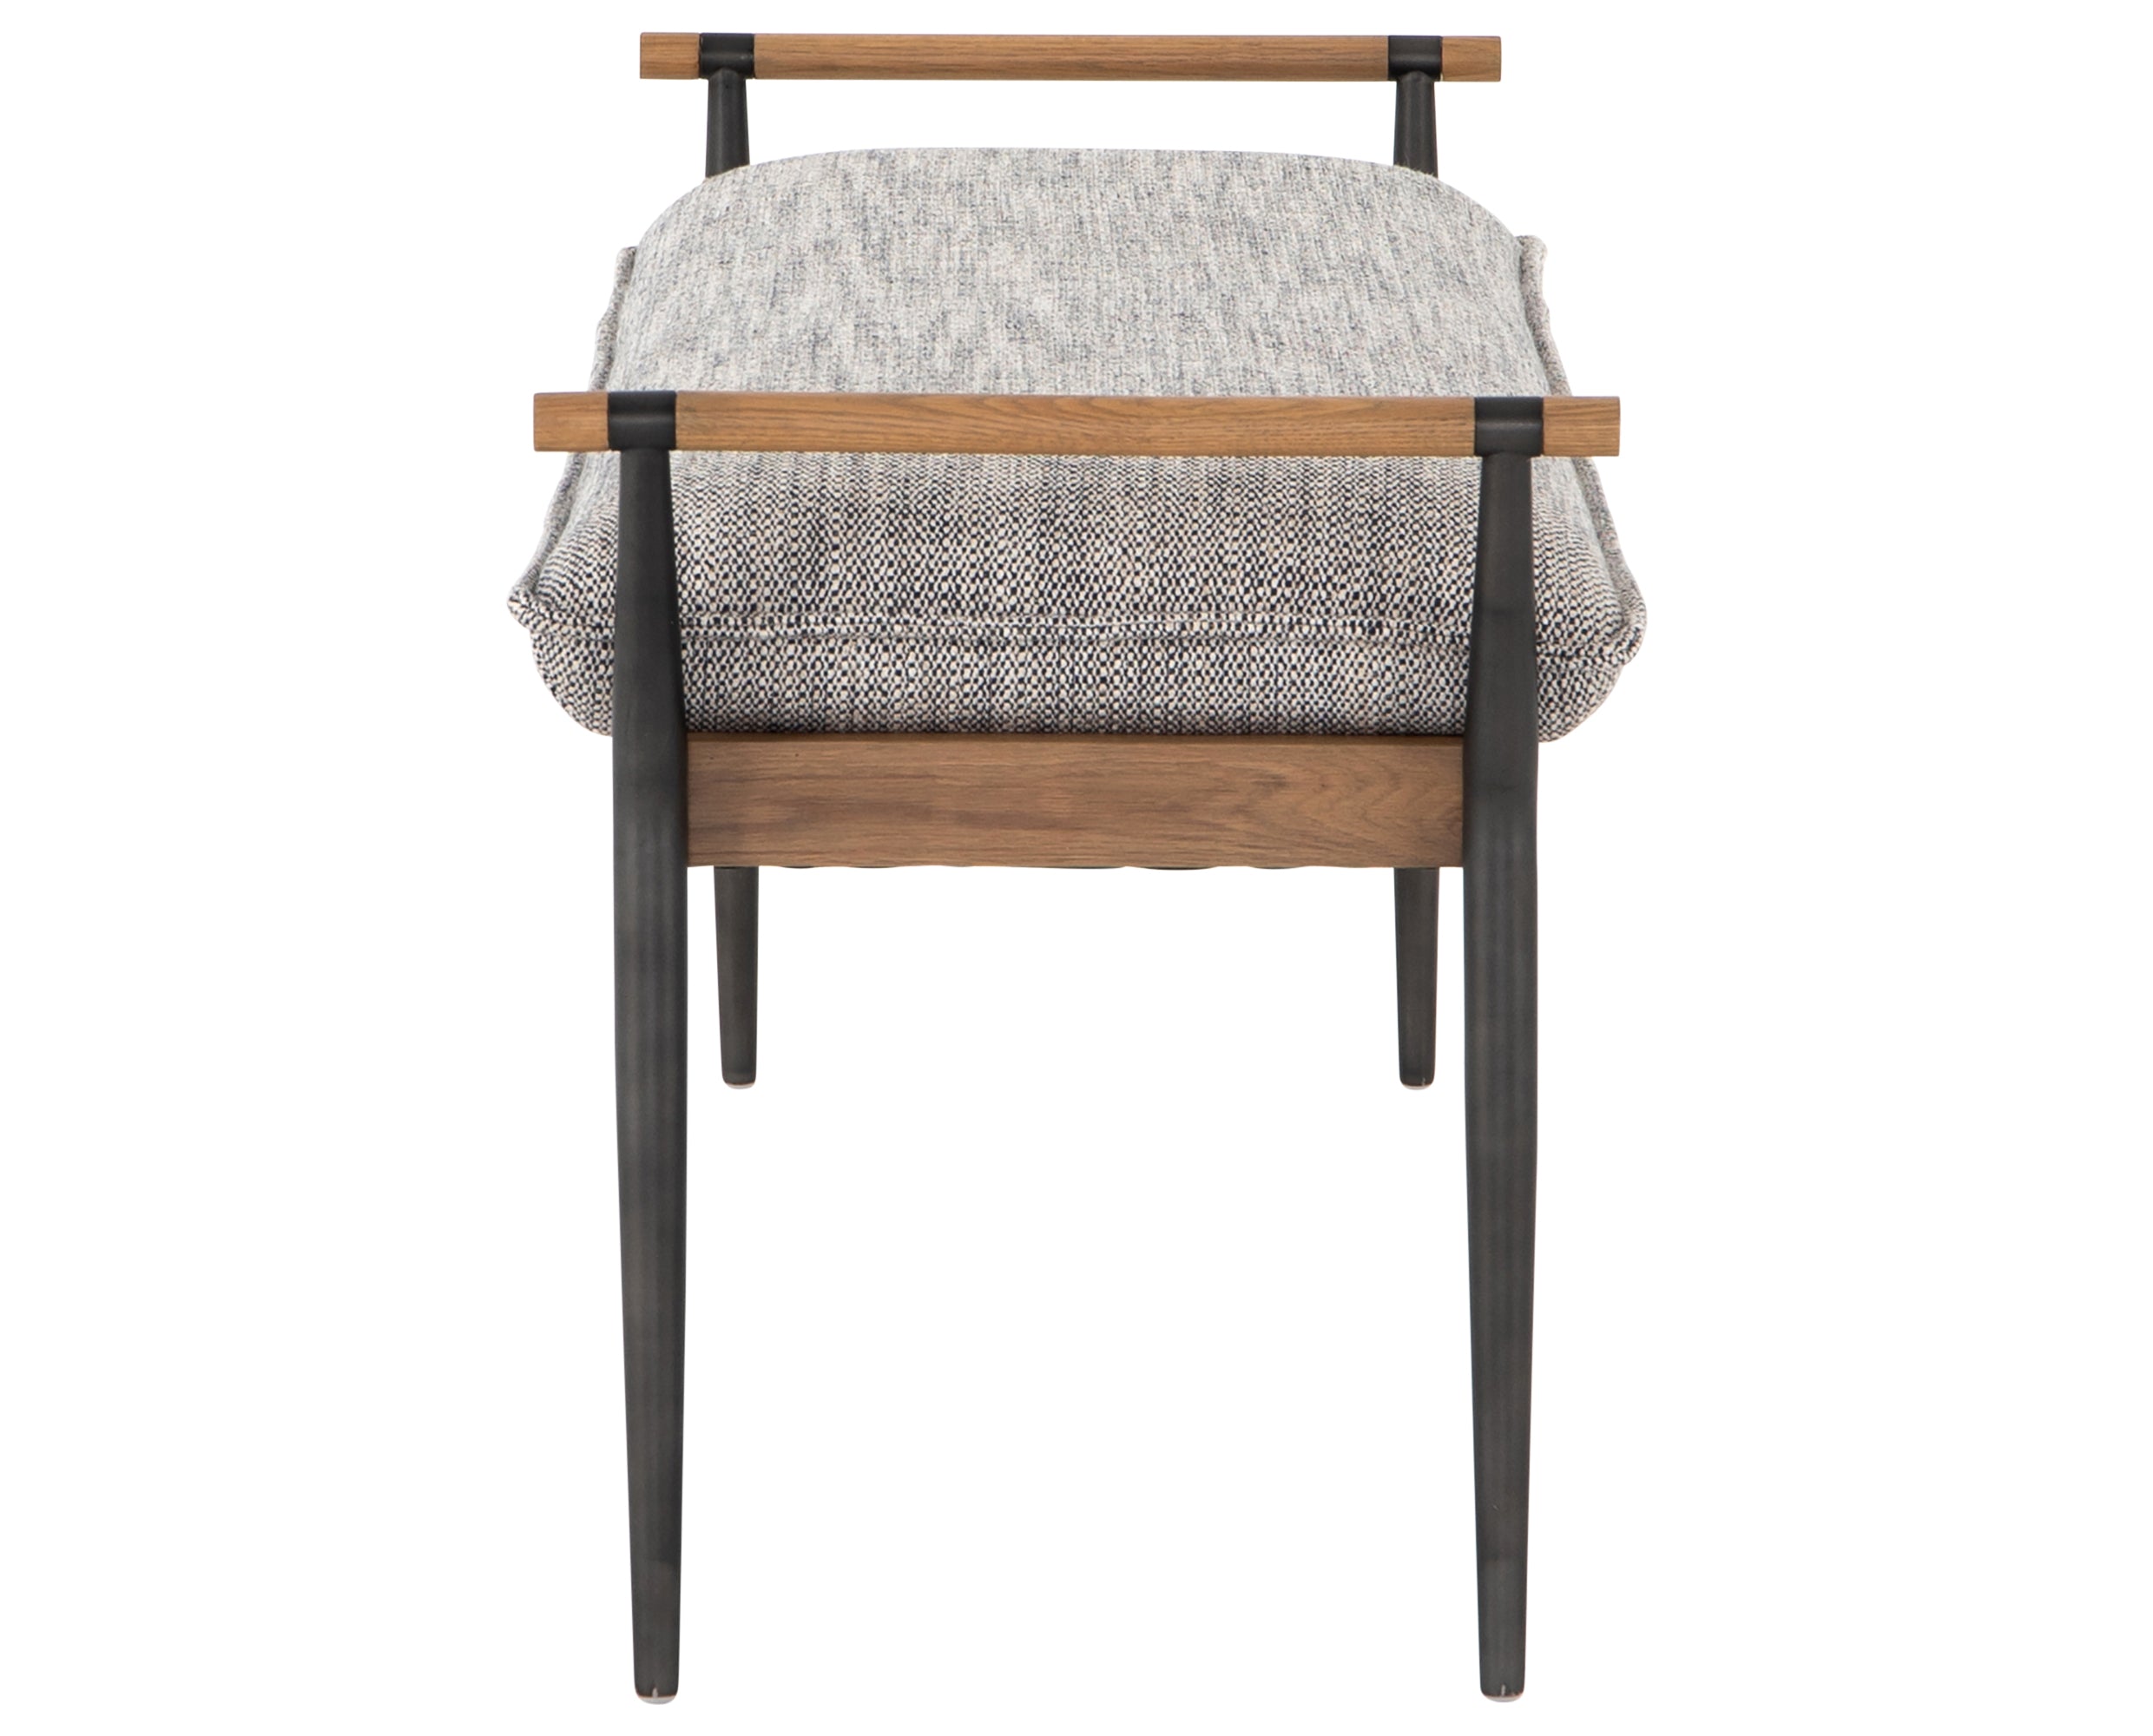 Thames Raven Fabric & Toasted Oak with Carbon Black Stainless Steel | Charlotte Bench | Valley Ridge Furniture